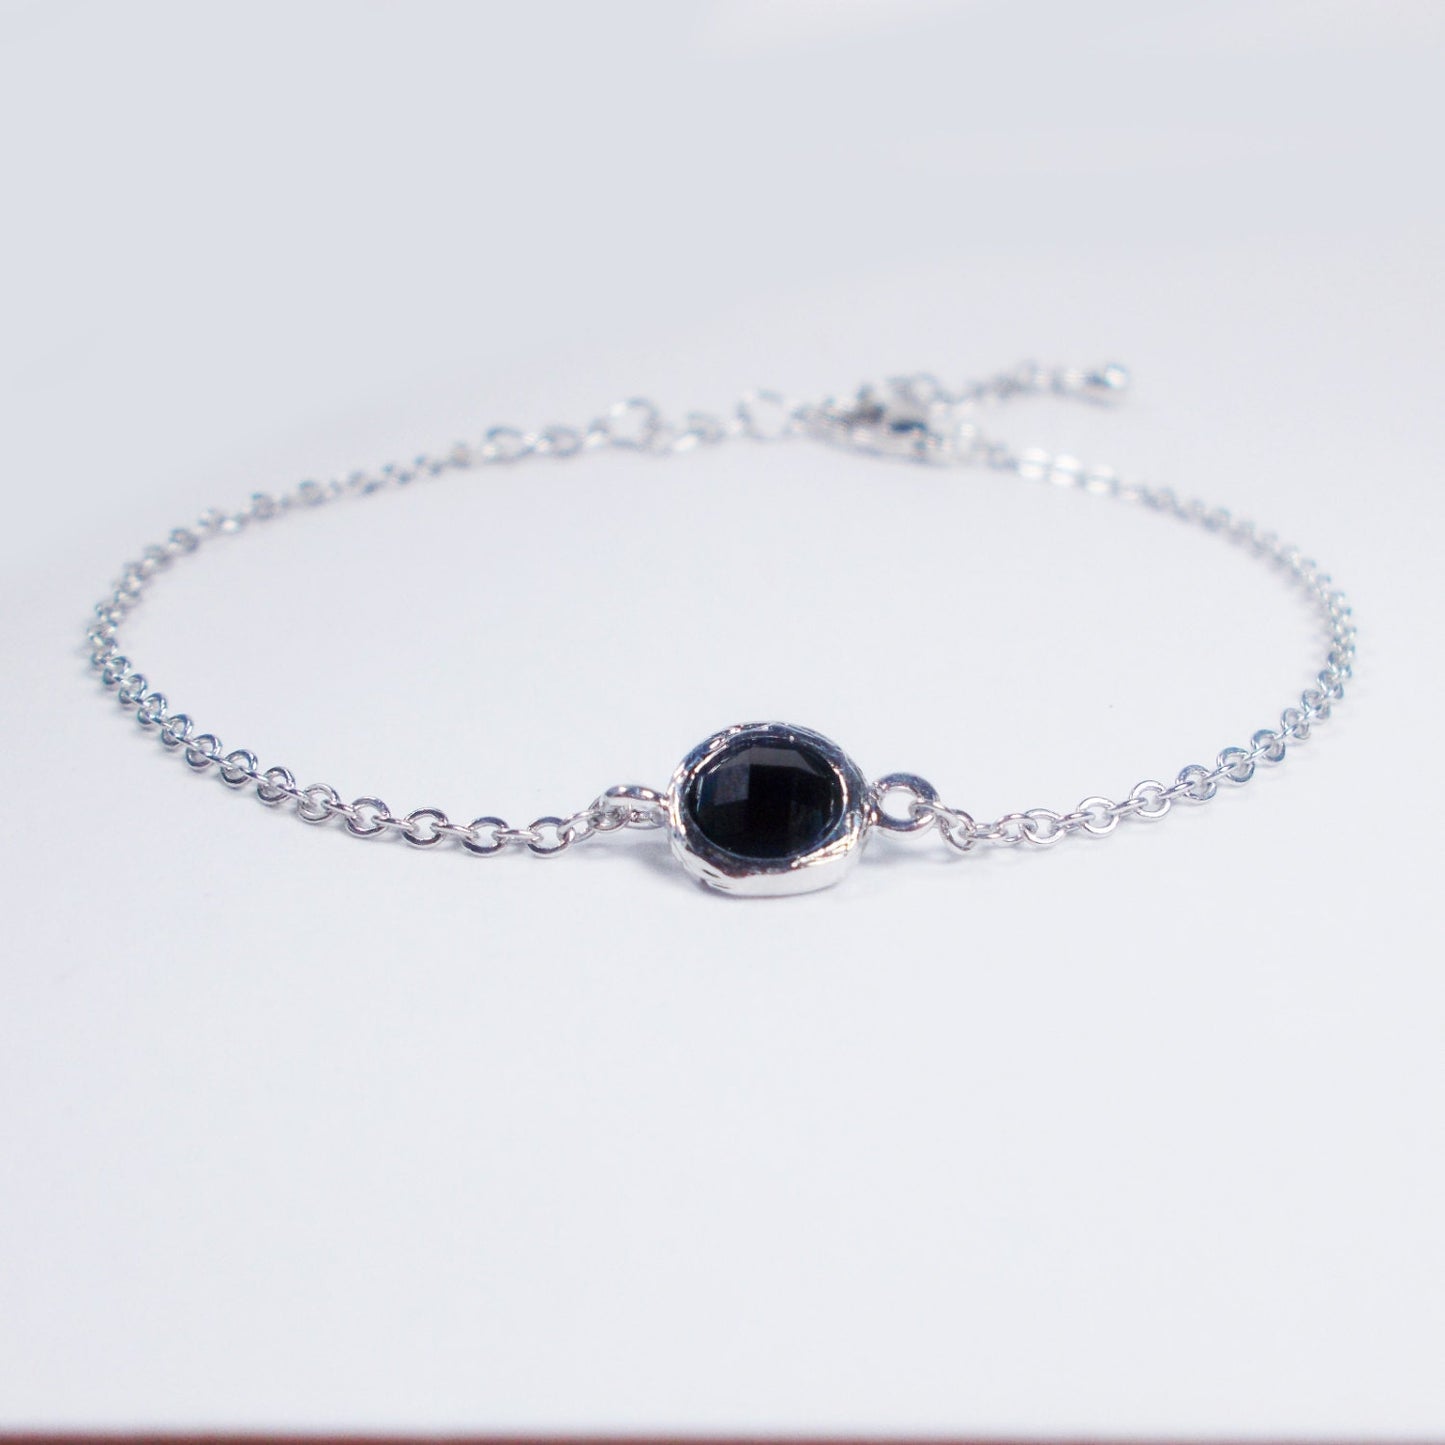 Mini Pop of Color Silver and Black Connector Stacking Bracelet - BridesMaid Gift - Black Stone Bracelet